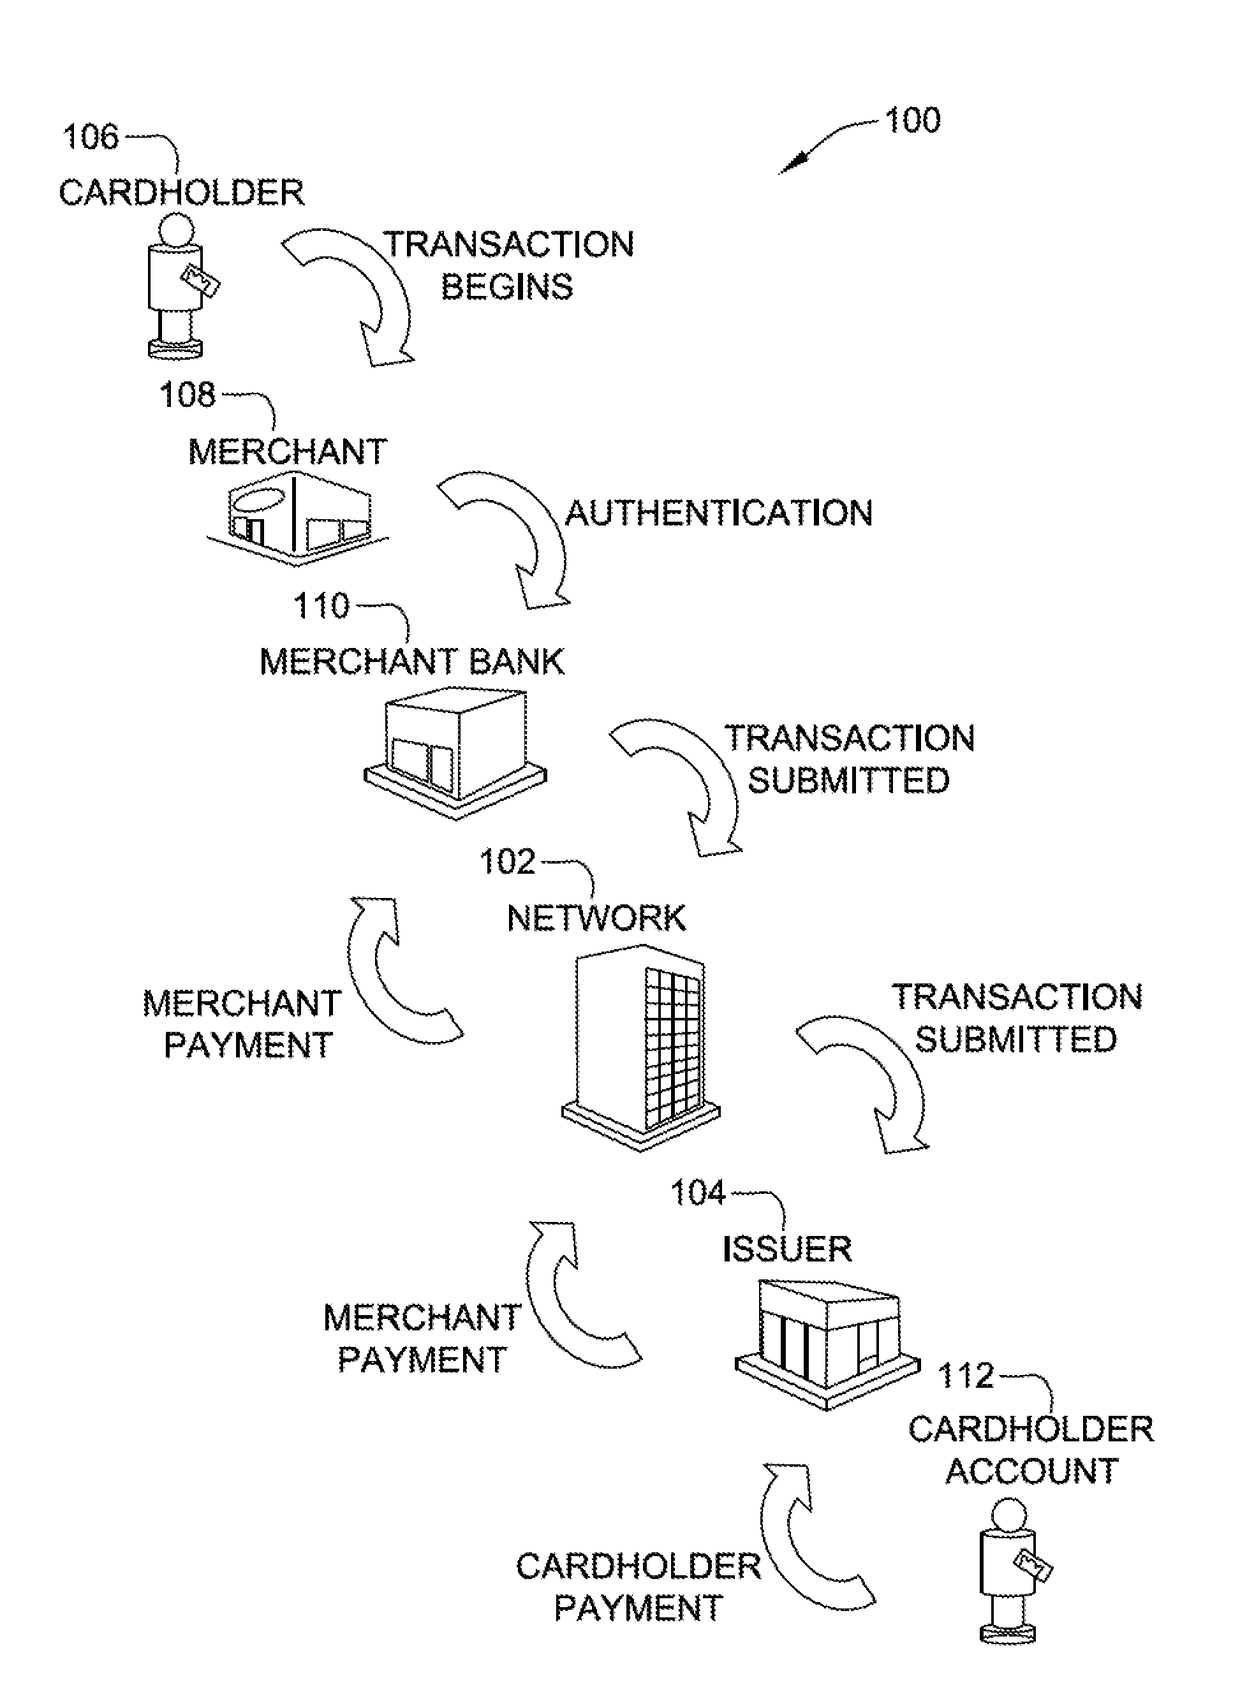 Systems and methods for predicting chargeback stages